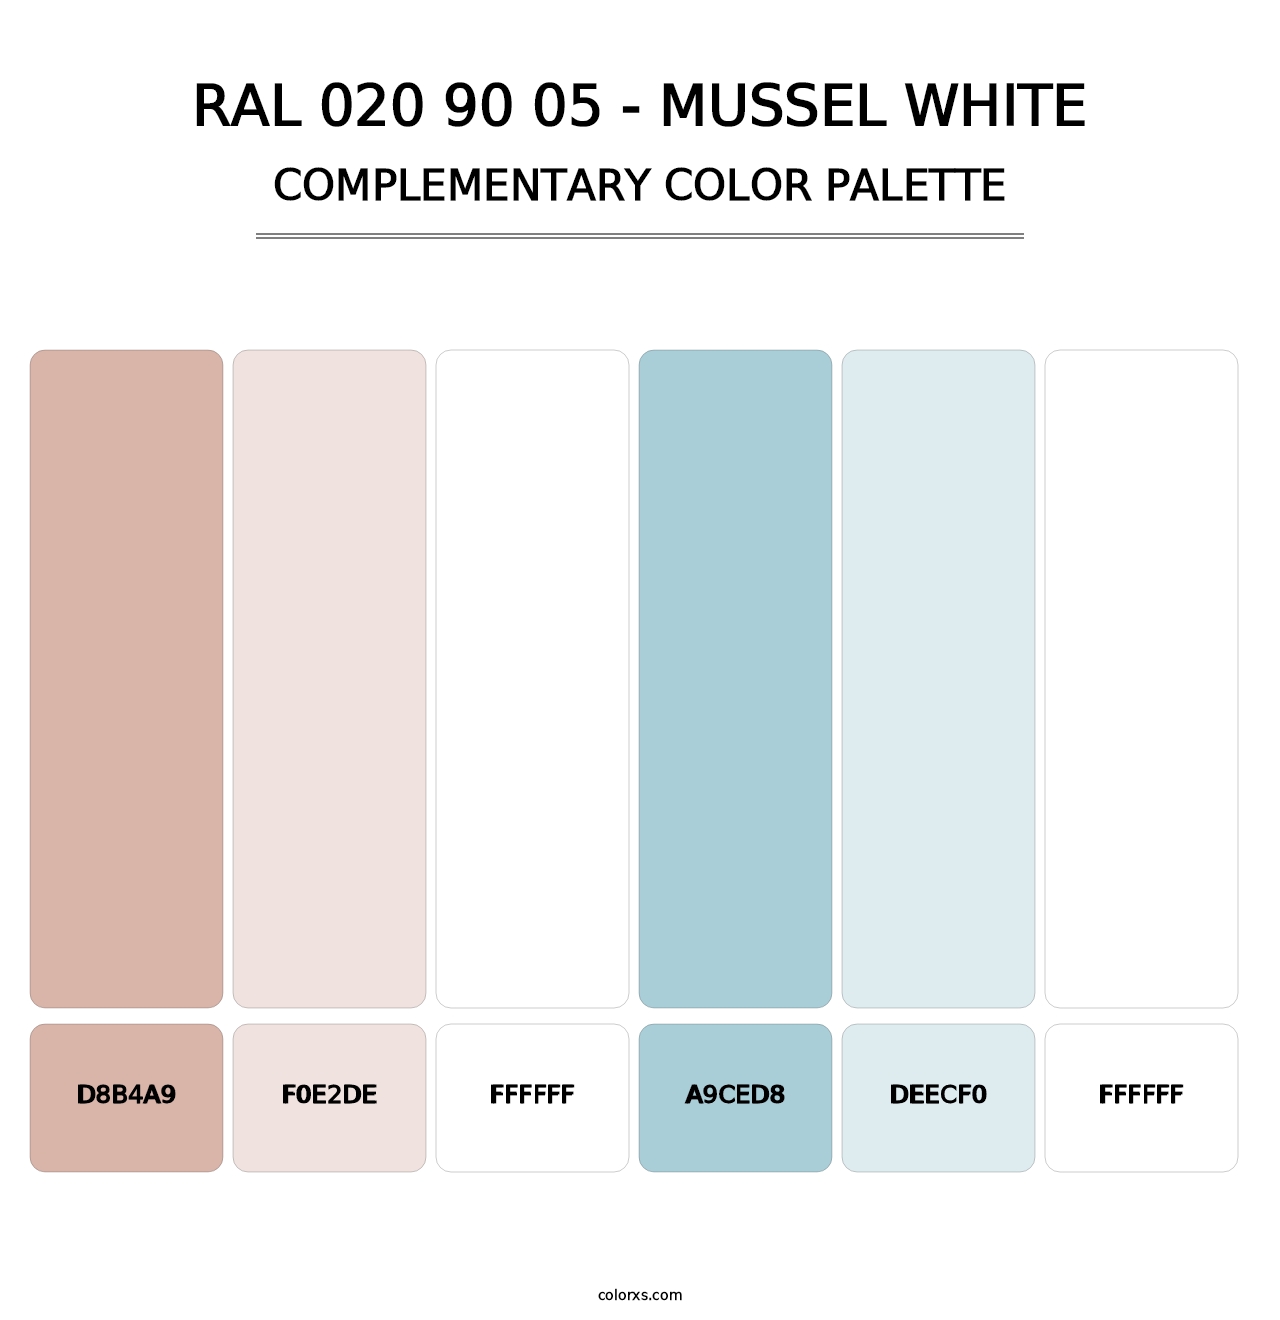 RAL 020 90 05 - Mussel White - Complementary Color Palette